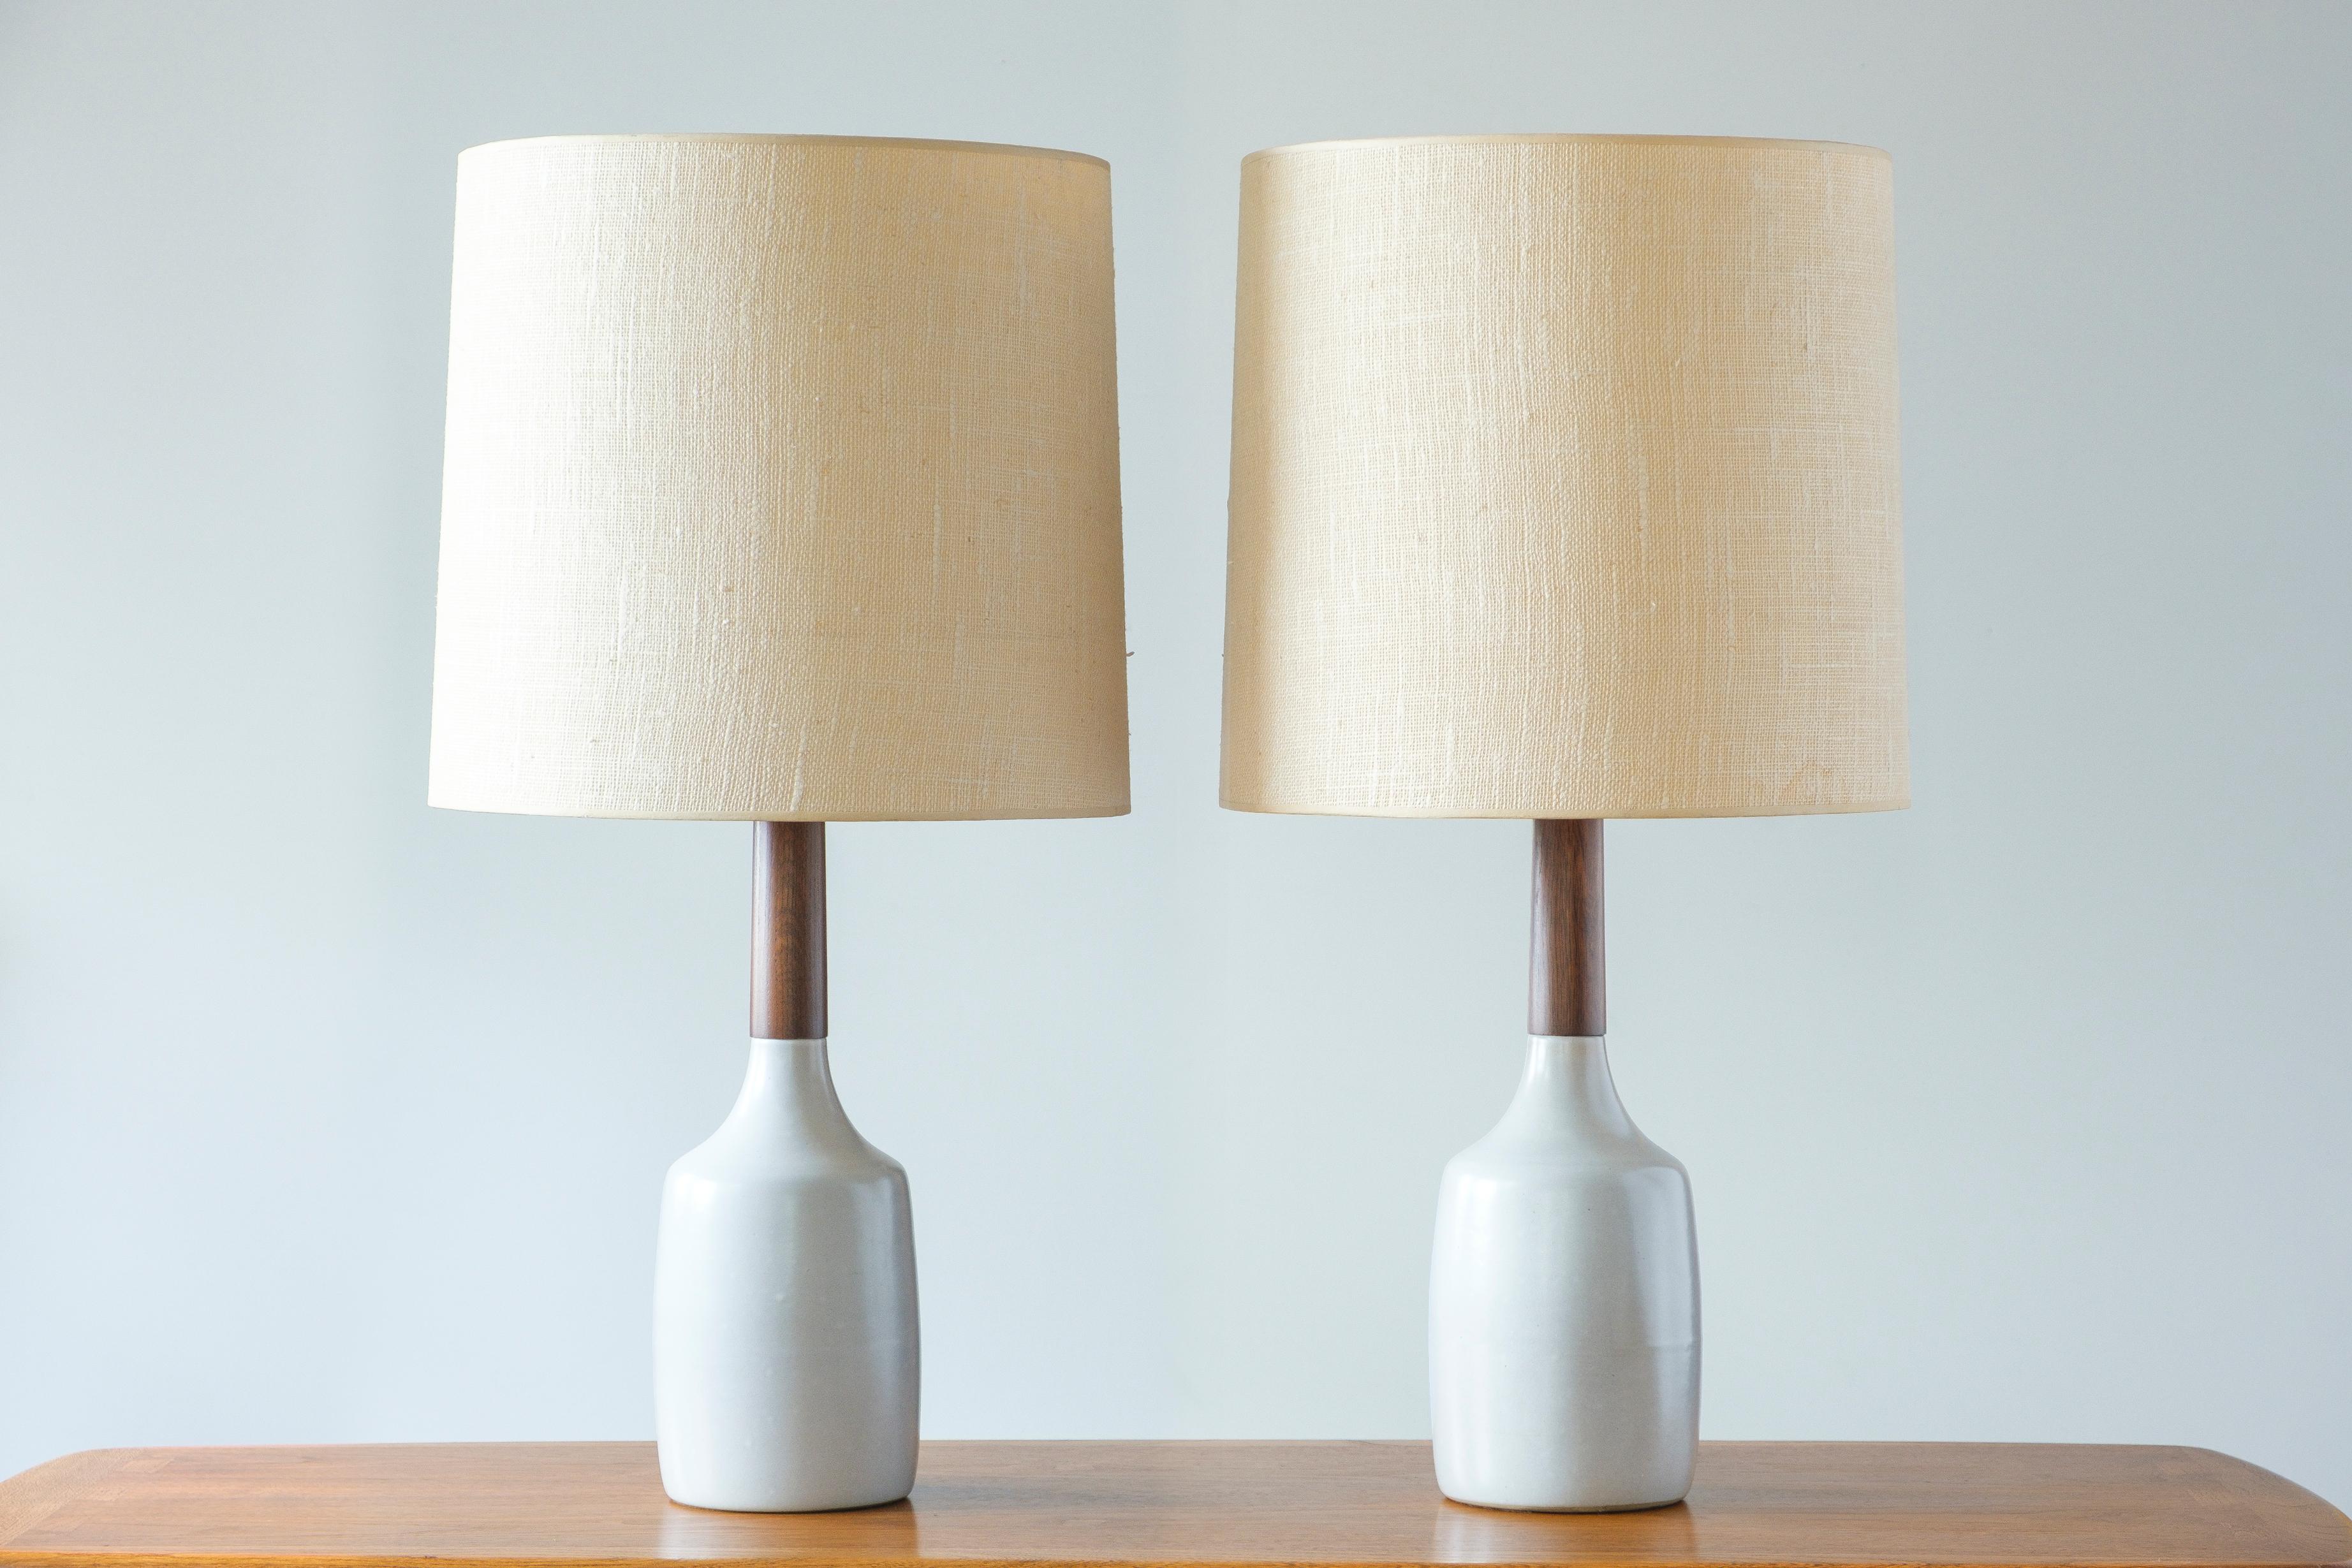 What is it?
—
A pair of ceramic and teak table lamps (shades not included) from the masters of mid century lightning – Gordon and Jane Martz.

These signed Martz lamps come in a satin white glaze with small flecks of red and blue. The ceramic base